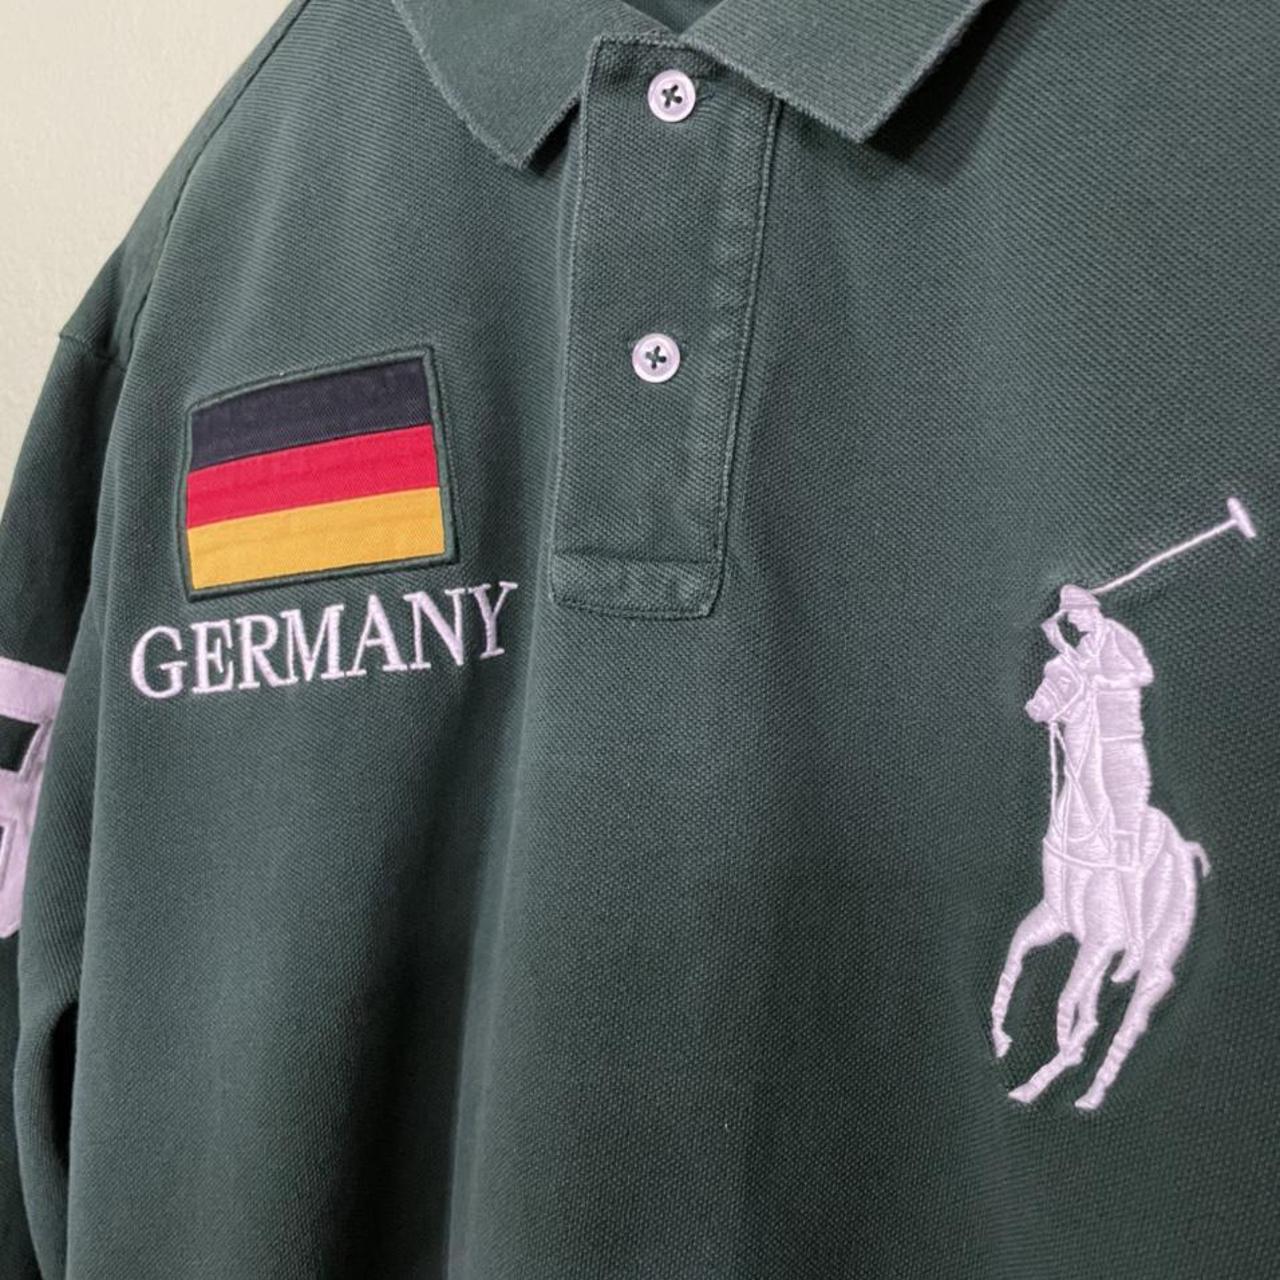 Product Image 2 - Vintage Polo Ralph Lauren Germany